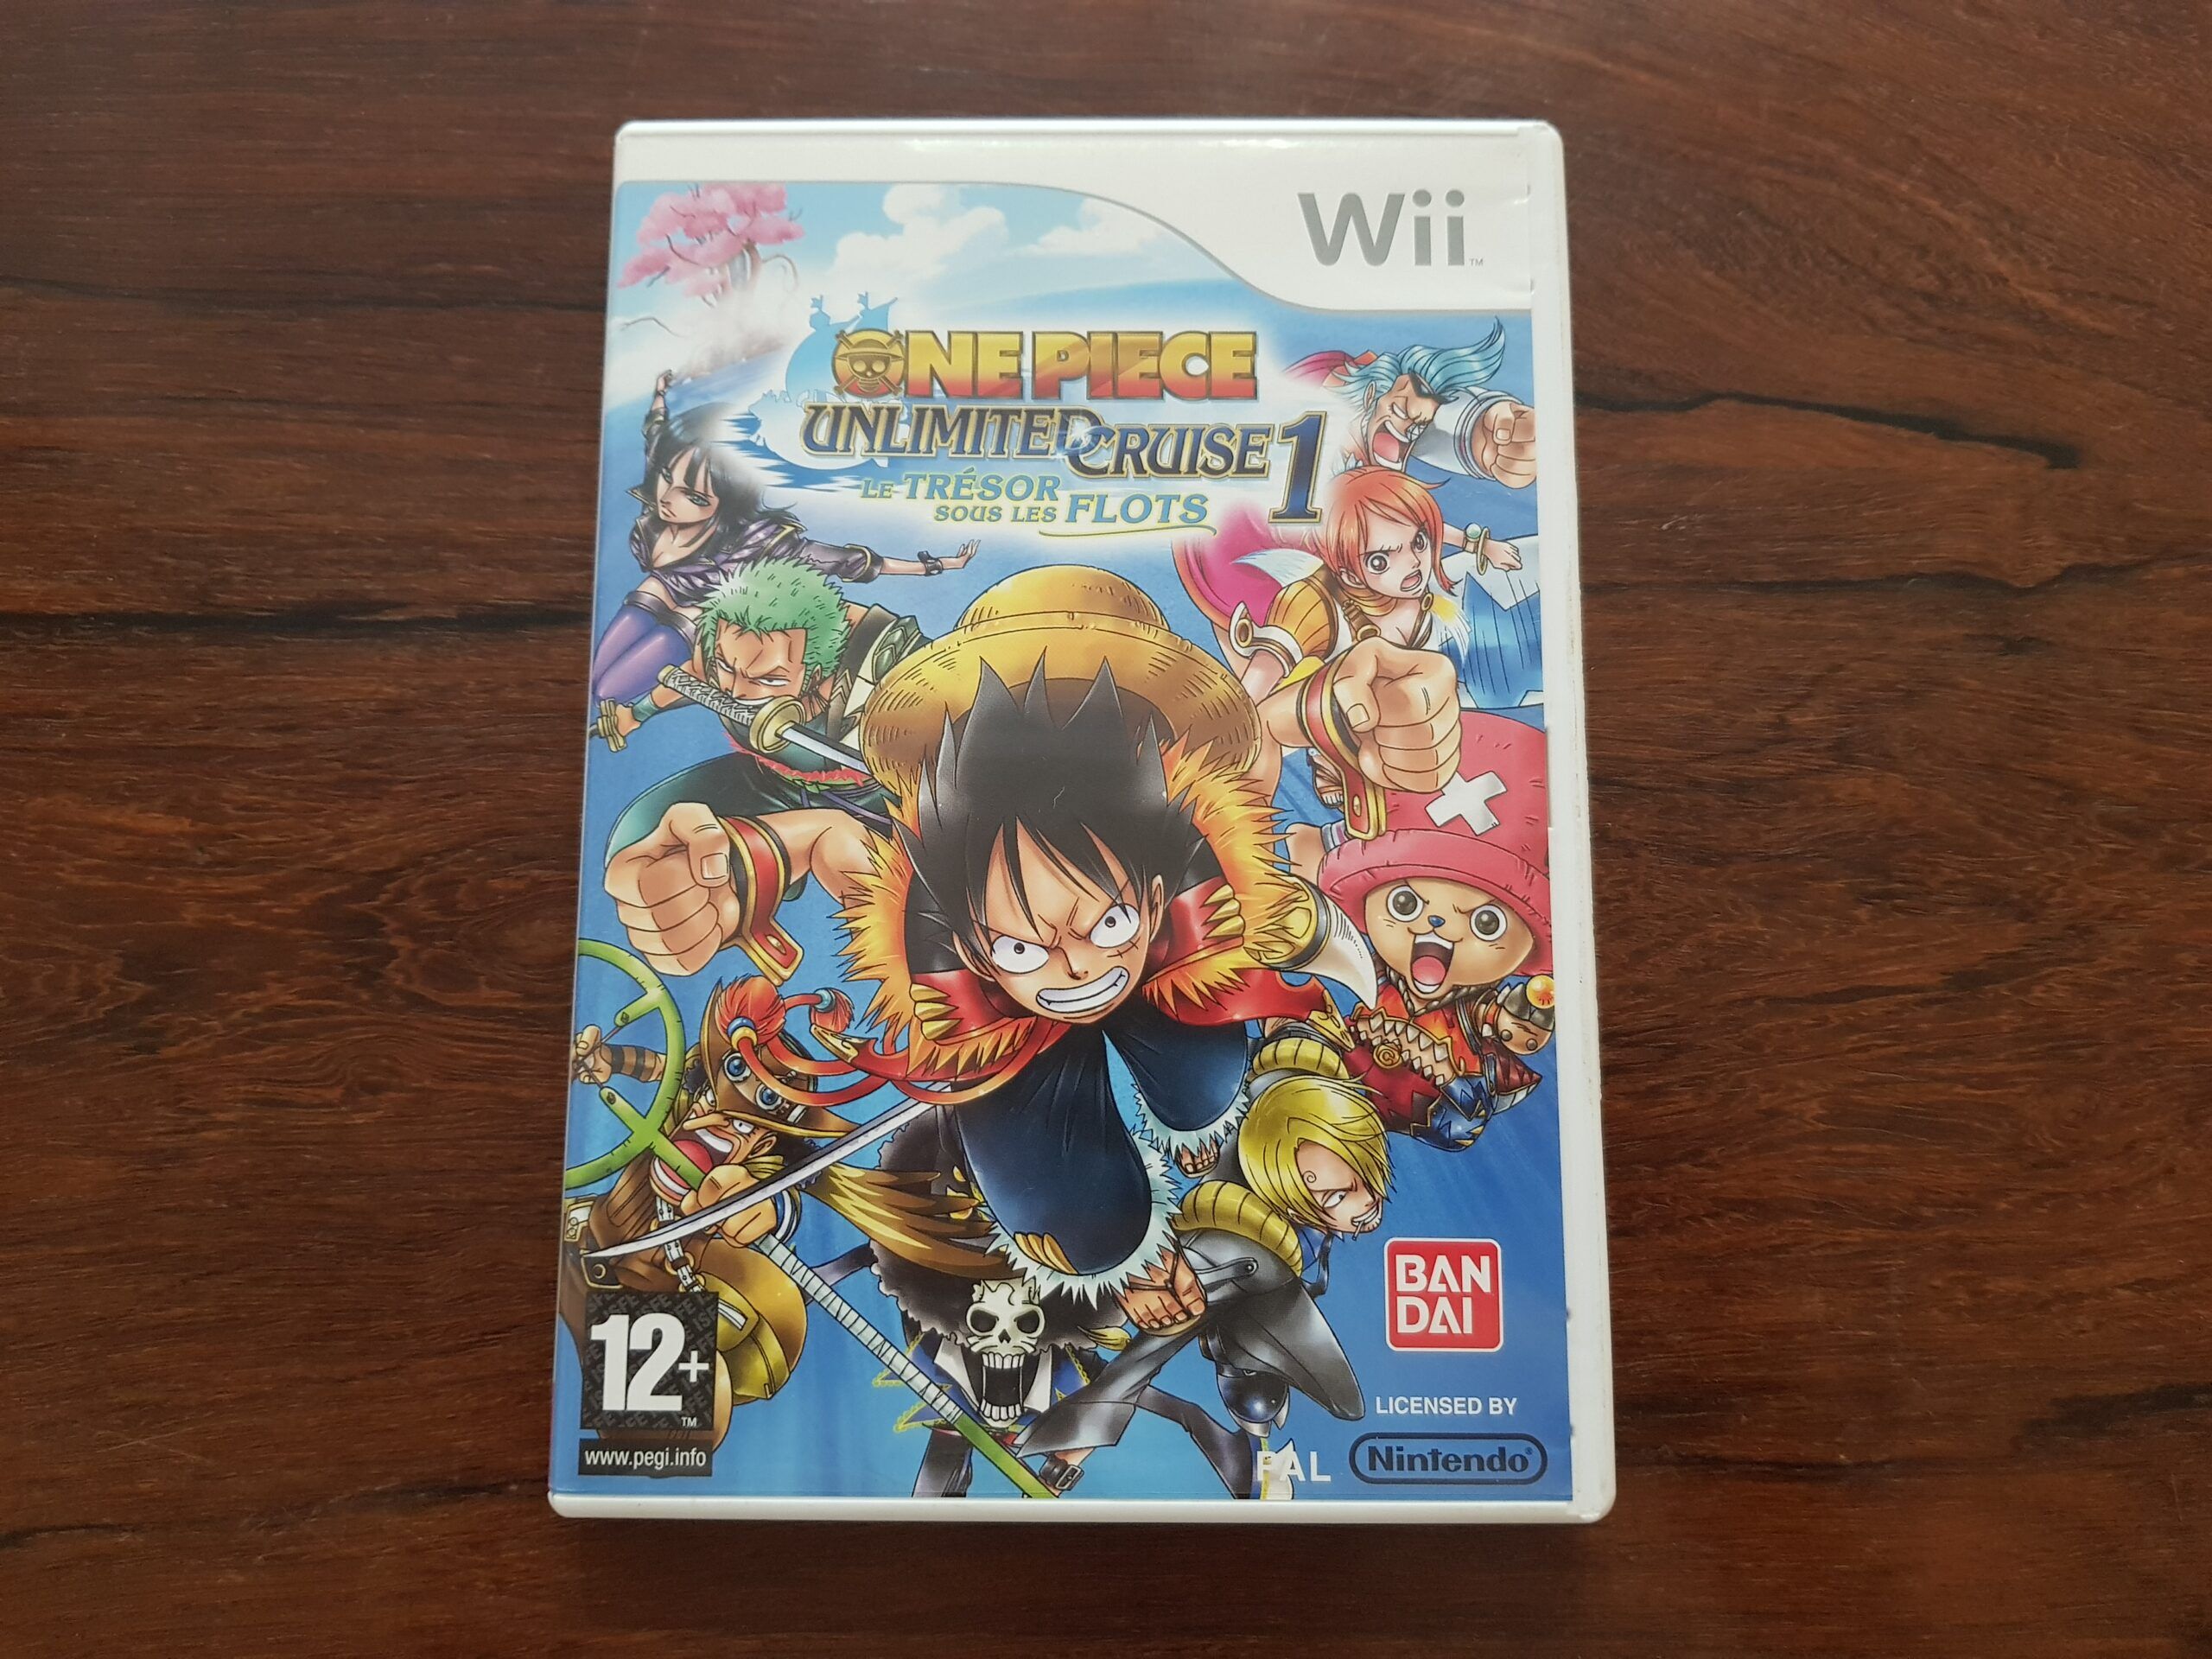 Jeu Wii NAMCO One piece Unlimited Cruise 1 Reconditionné